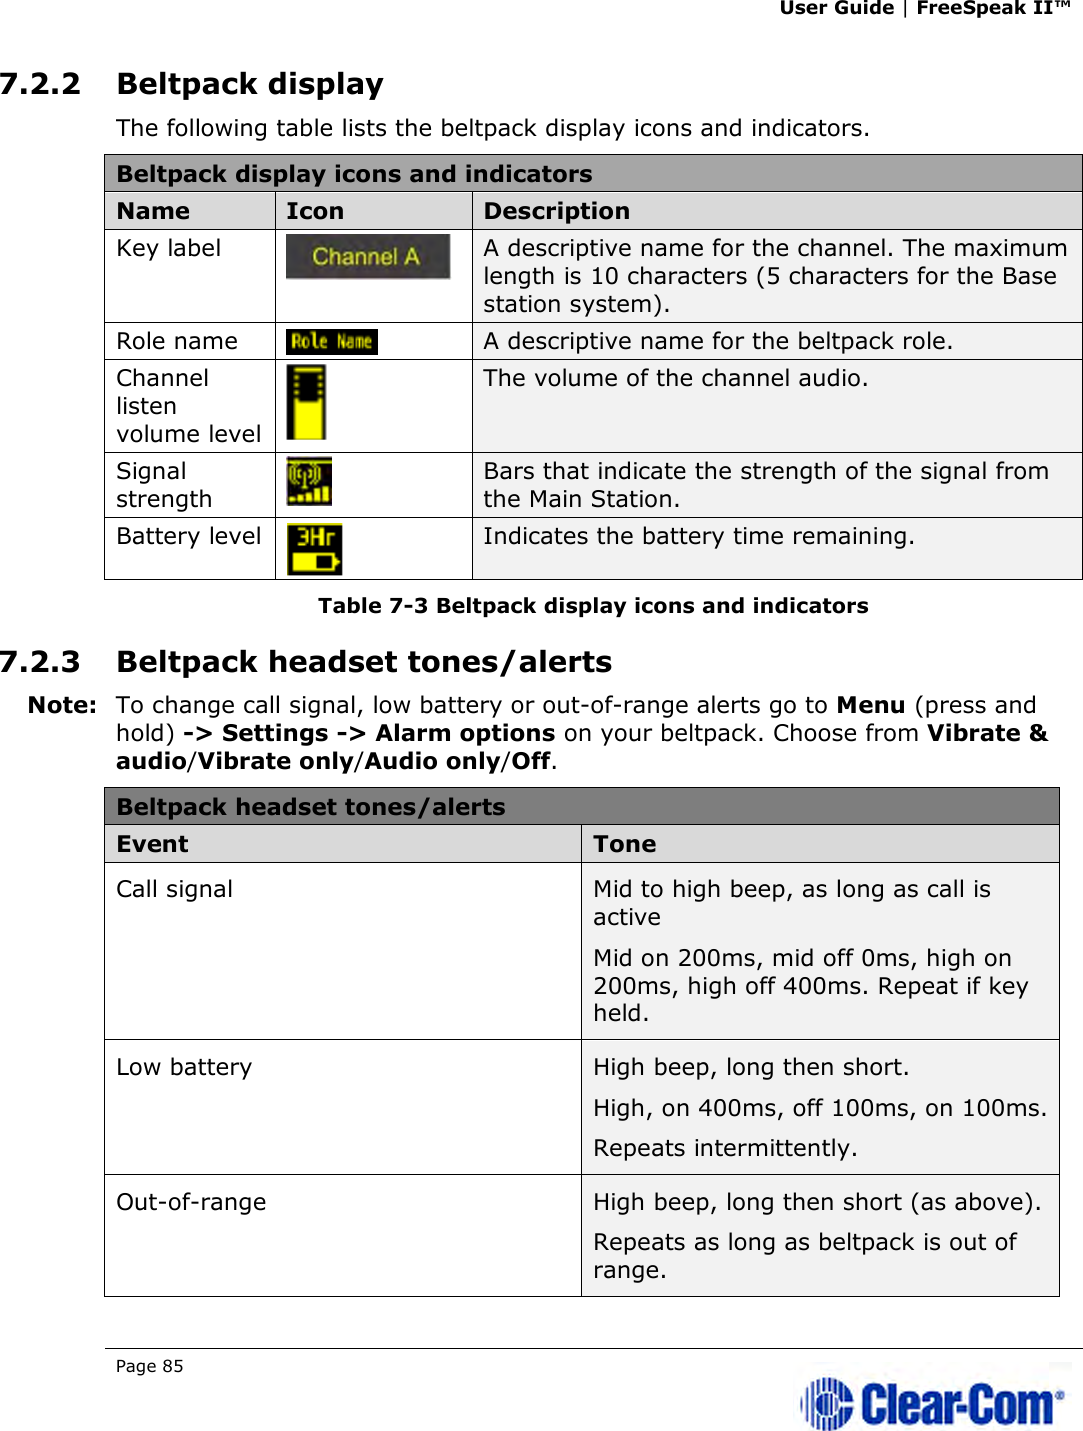 User Guide | FreeSpeak II™  Page 85   7.2.2 Beltpack display The following table lists the beltpack display icons and indicators. Beltpack display icons and indicators Name  Icon  Description Key label   A descriptive name for the channel. The maximum length is 10 characters (5 characters for the Base station system). Role name  A descriptive name for the beltpack role. Channel listen volume level  The volume of the channel audio. Signal strength   Bars that indicate the strength of the signal from the Main Station.  Battery level  Indicates the battery time remaining. Table 7-3 Beltpack display icons and indicators 7.2.3 Beltpack headset tones/alerts Note: To change call signal, low battery or out-of-range alerts go to Menu (press and hold) -&gt; Settings -&gt; Alarm options on your beltpack. Choose from Vibrate &amp; audio/Vibrate only/Audio only/Off. Beltpack headset tones/alerts Event  Tone Call signal  Mid to high beep, as long as call is active Mid on 200ms, mid off 0ms, high on 200ms, high off 400ms. Repeat if key held. Low battery  High beep, long then short. High, on 400ms, off 100ms, on 100ms.  Repeats intermittently.  Out-of-range  High beep, long then short (as above). Repeats as long as beltpack is out of range. 